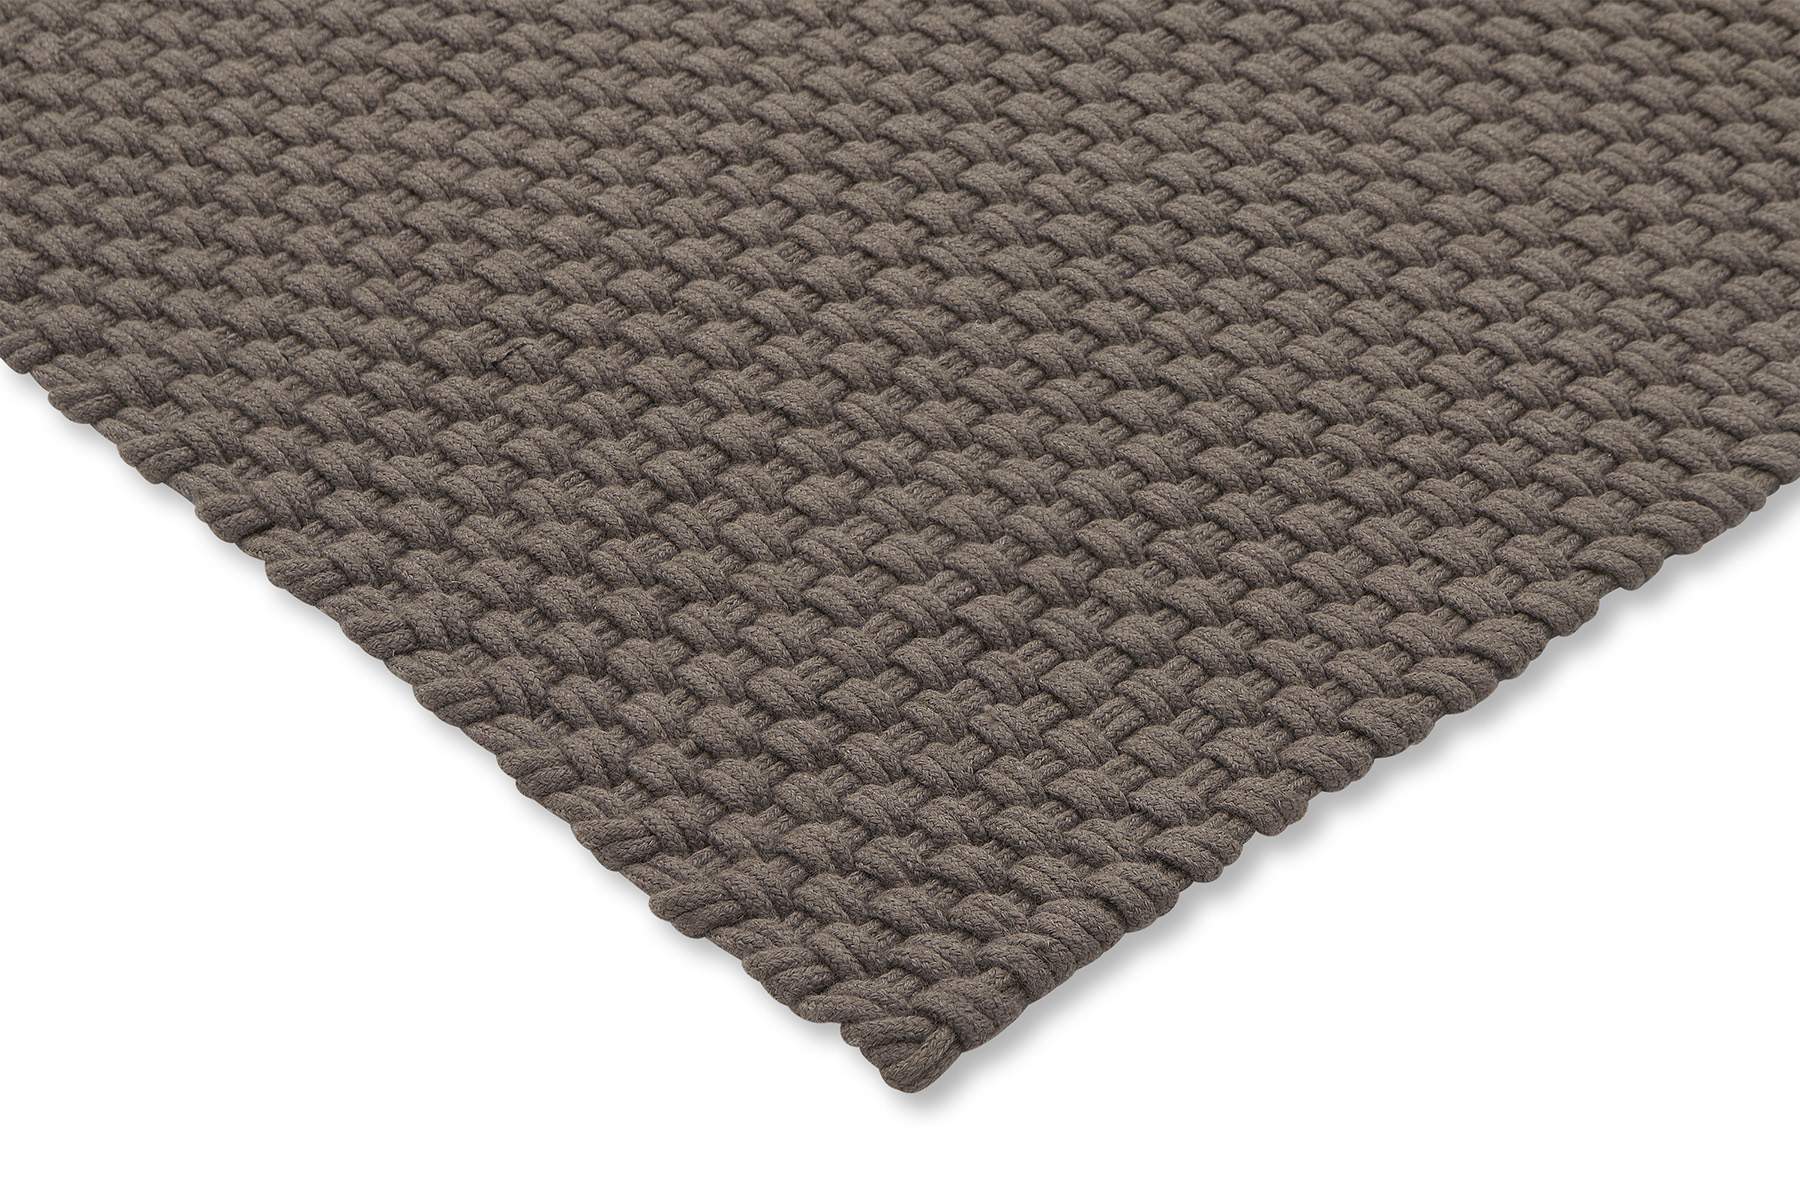 Grey / Taupe Outdoor Handwoven Rug ☞ Size: 200 x 280 cm